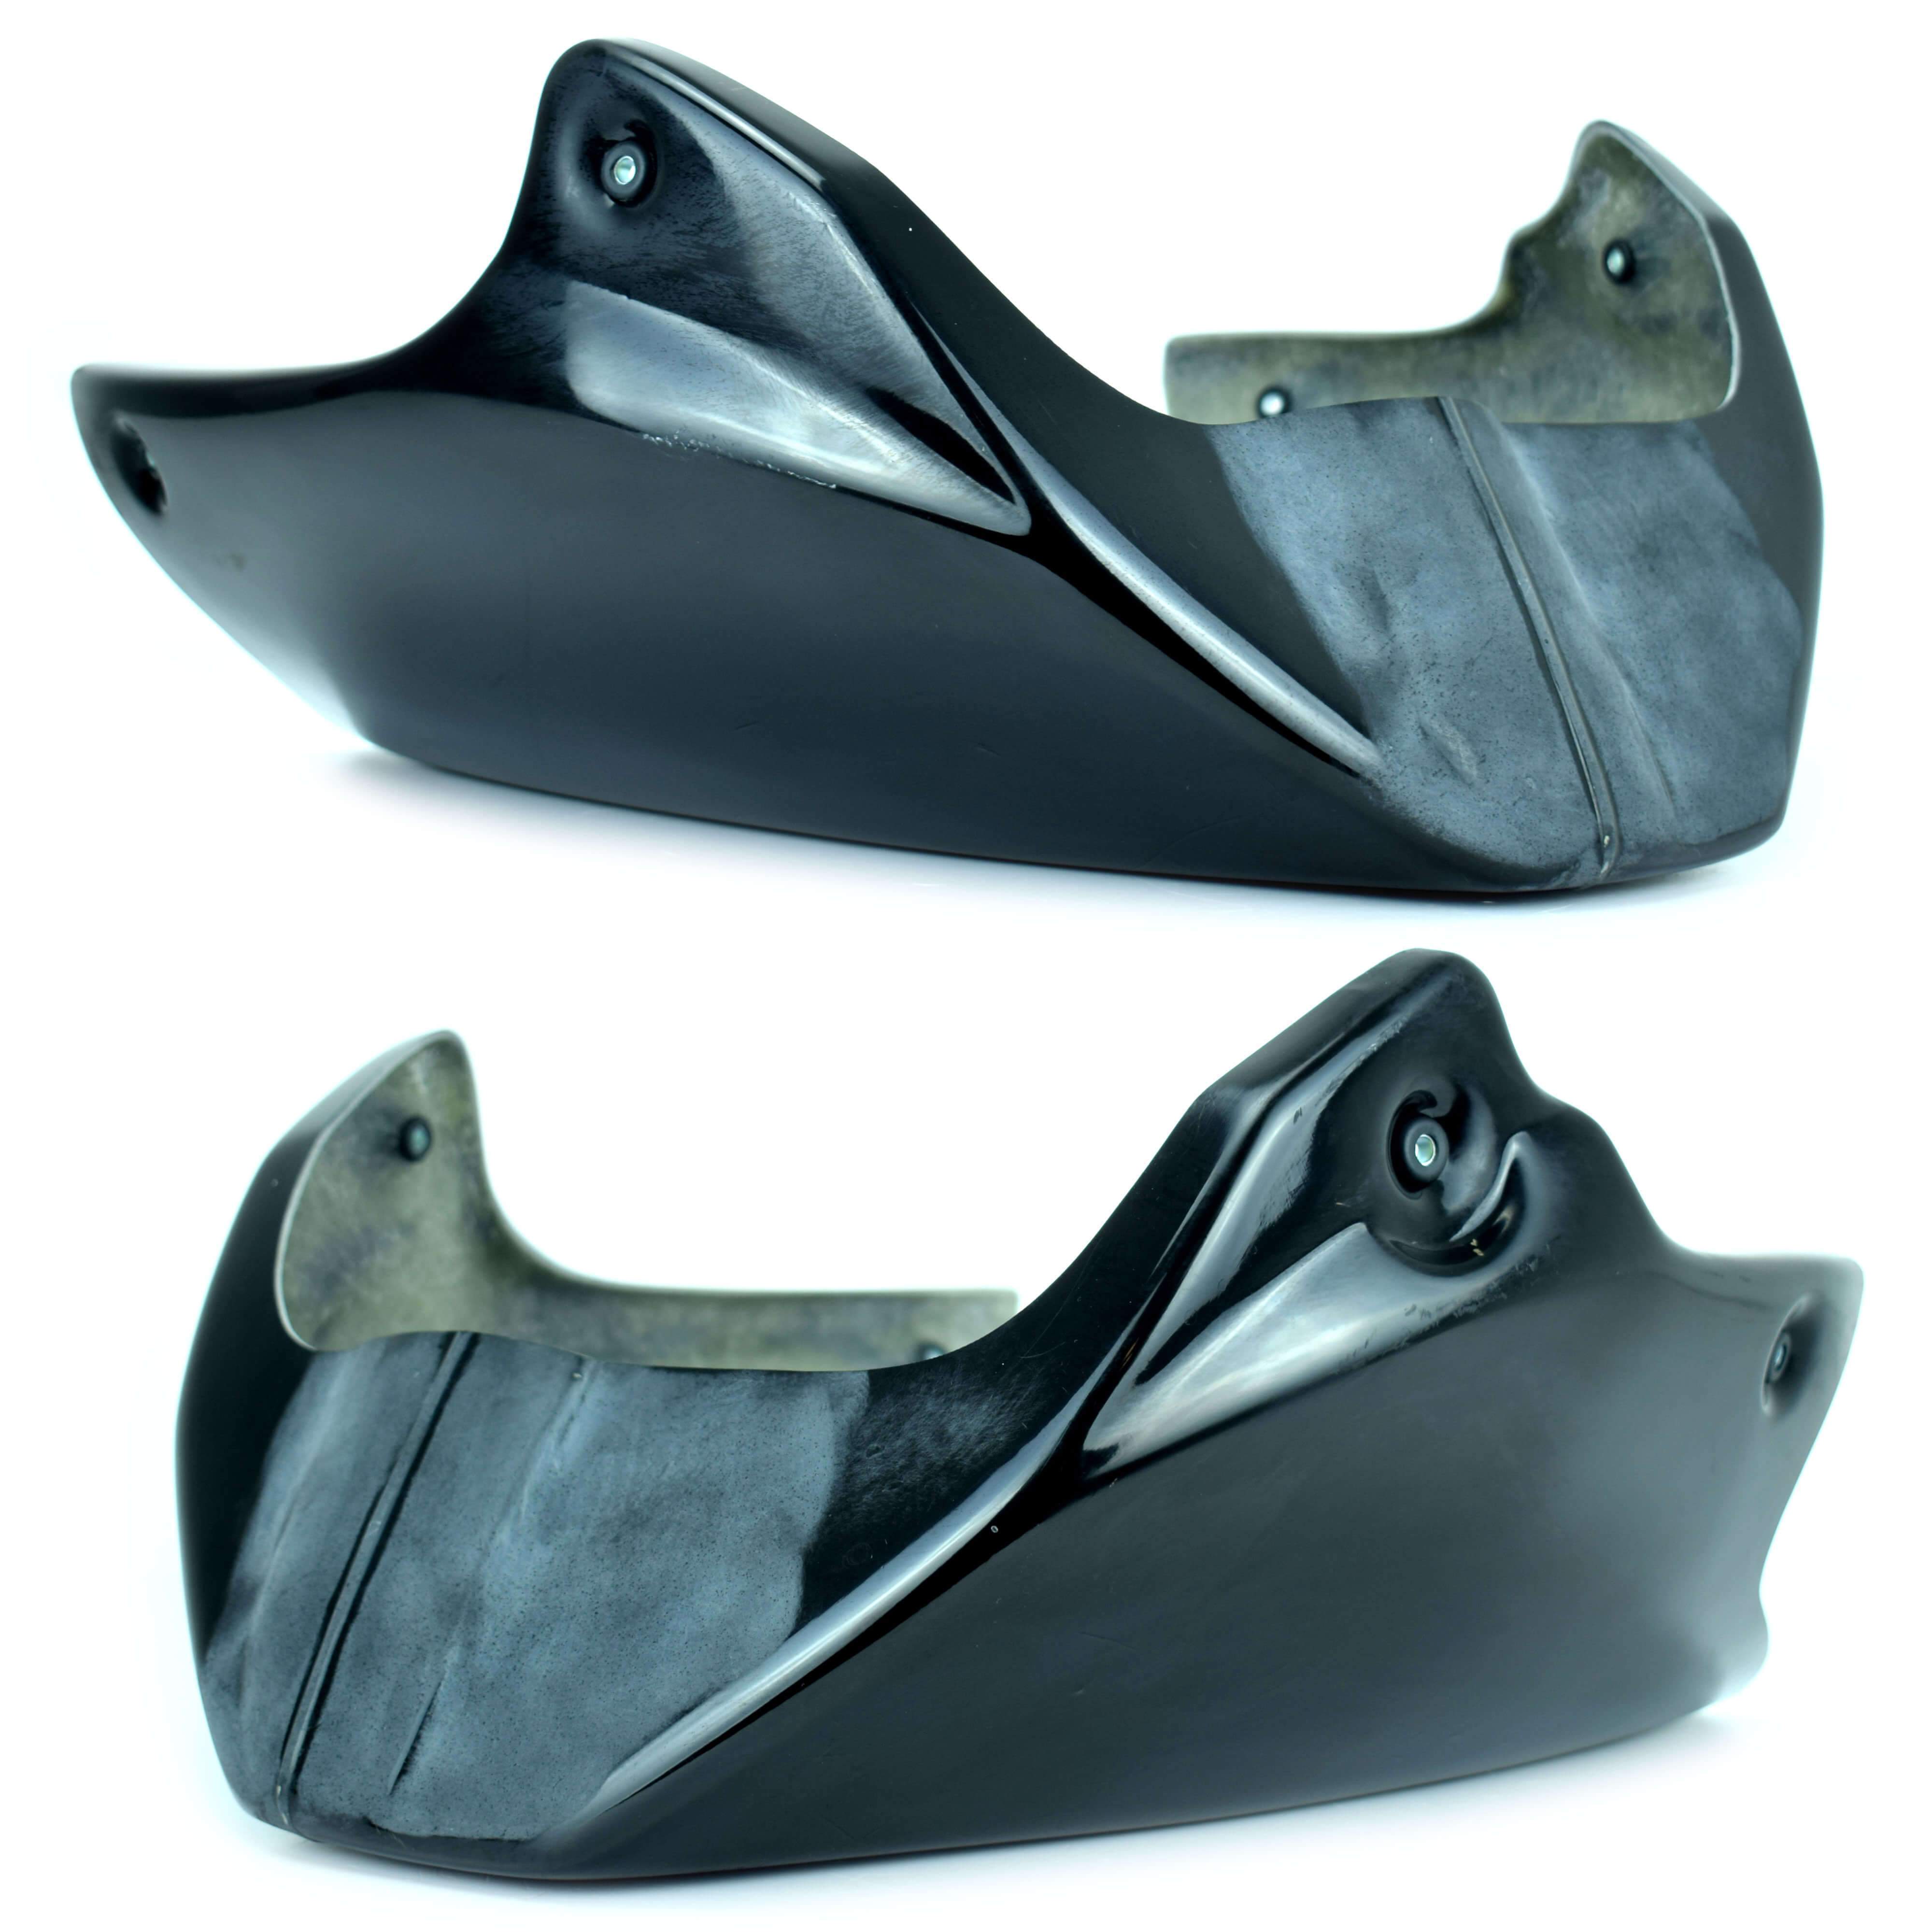 Pyramid Belly Pan | Unpainted | Yamaha XJR 1300 1999>2006-22100U-Belly Pans-Pyramid Motorcycle Accessories